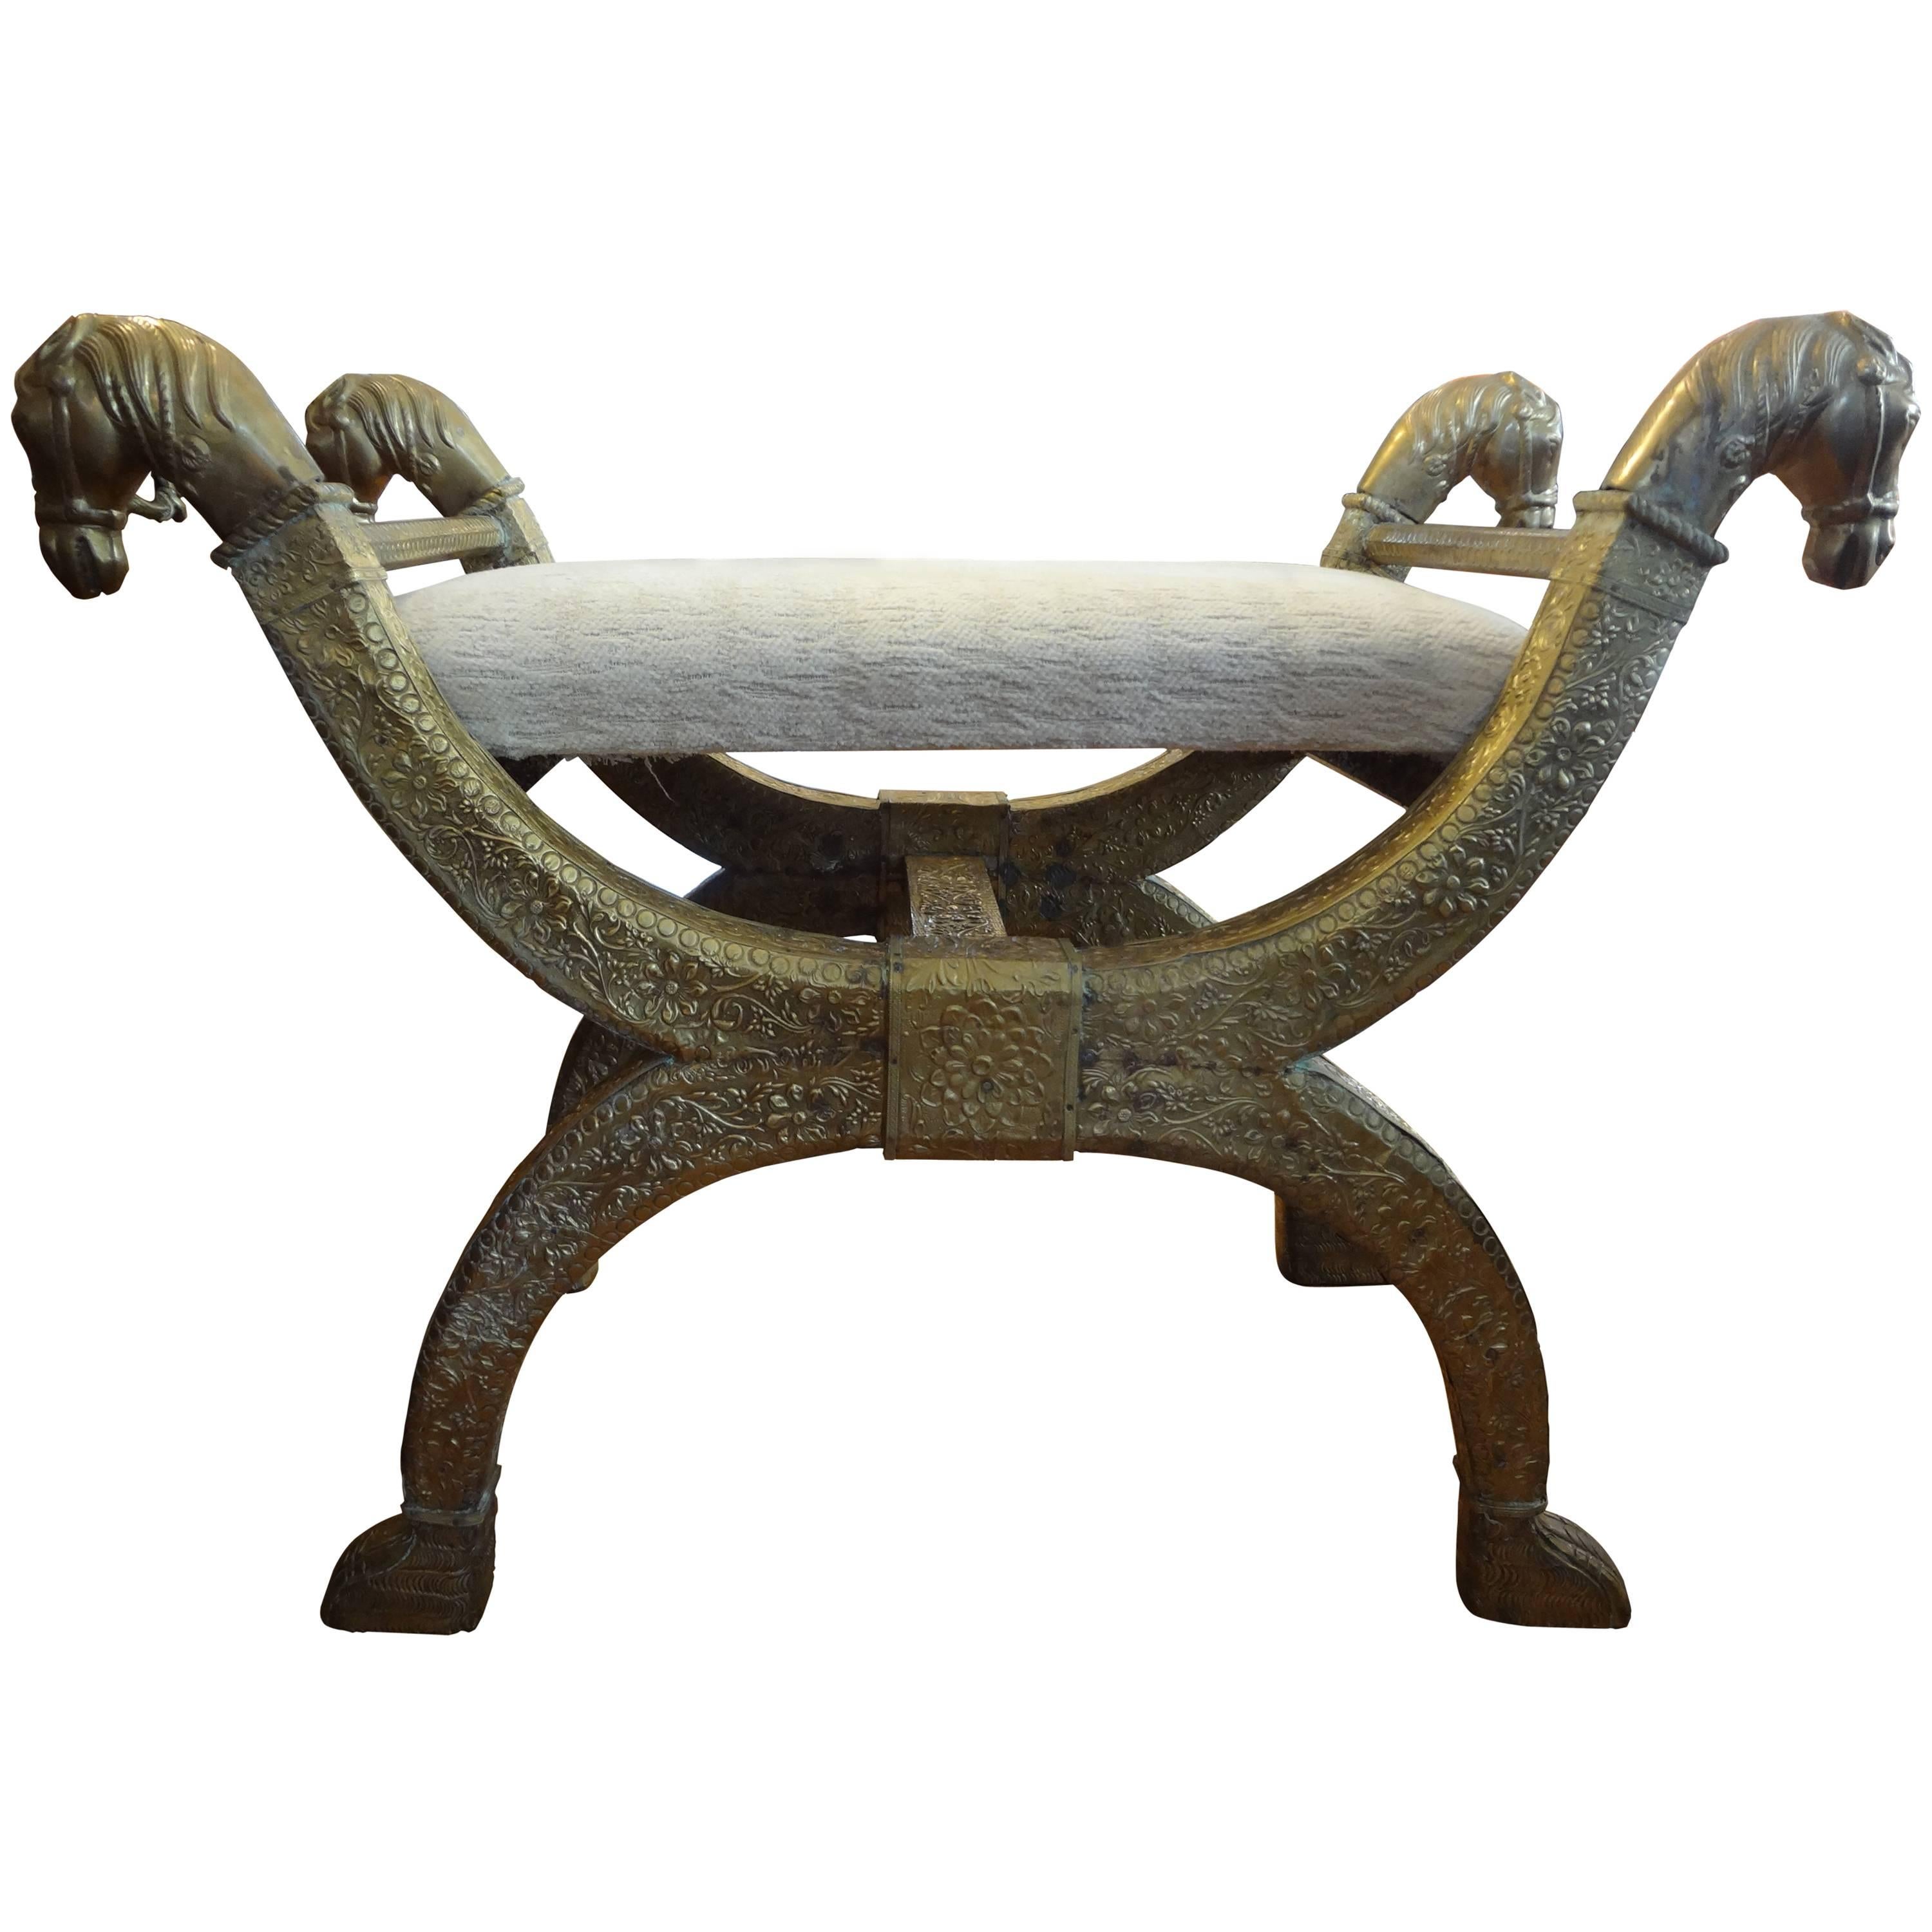 Anglo-Indian Brass Clad Bench with Horse Head Detail